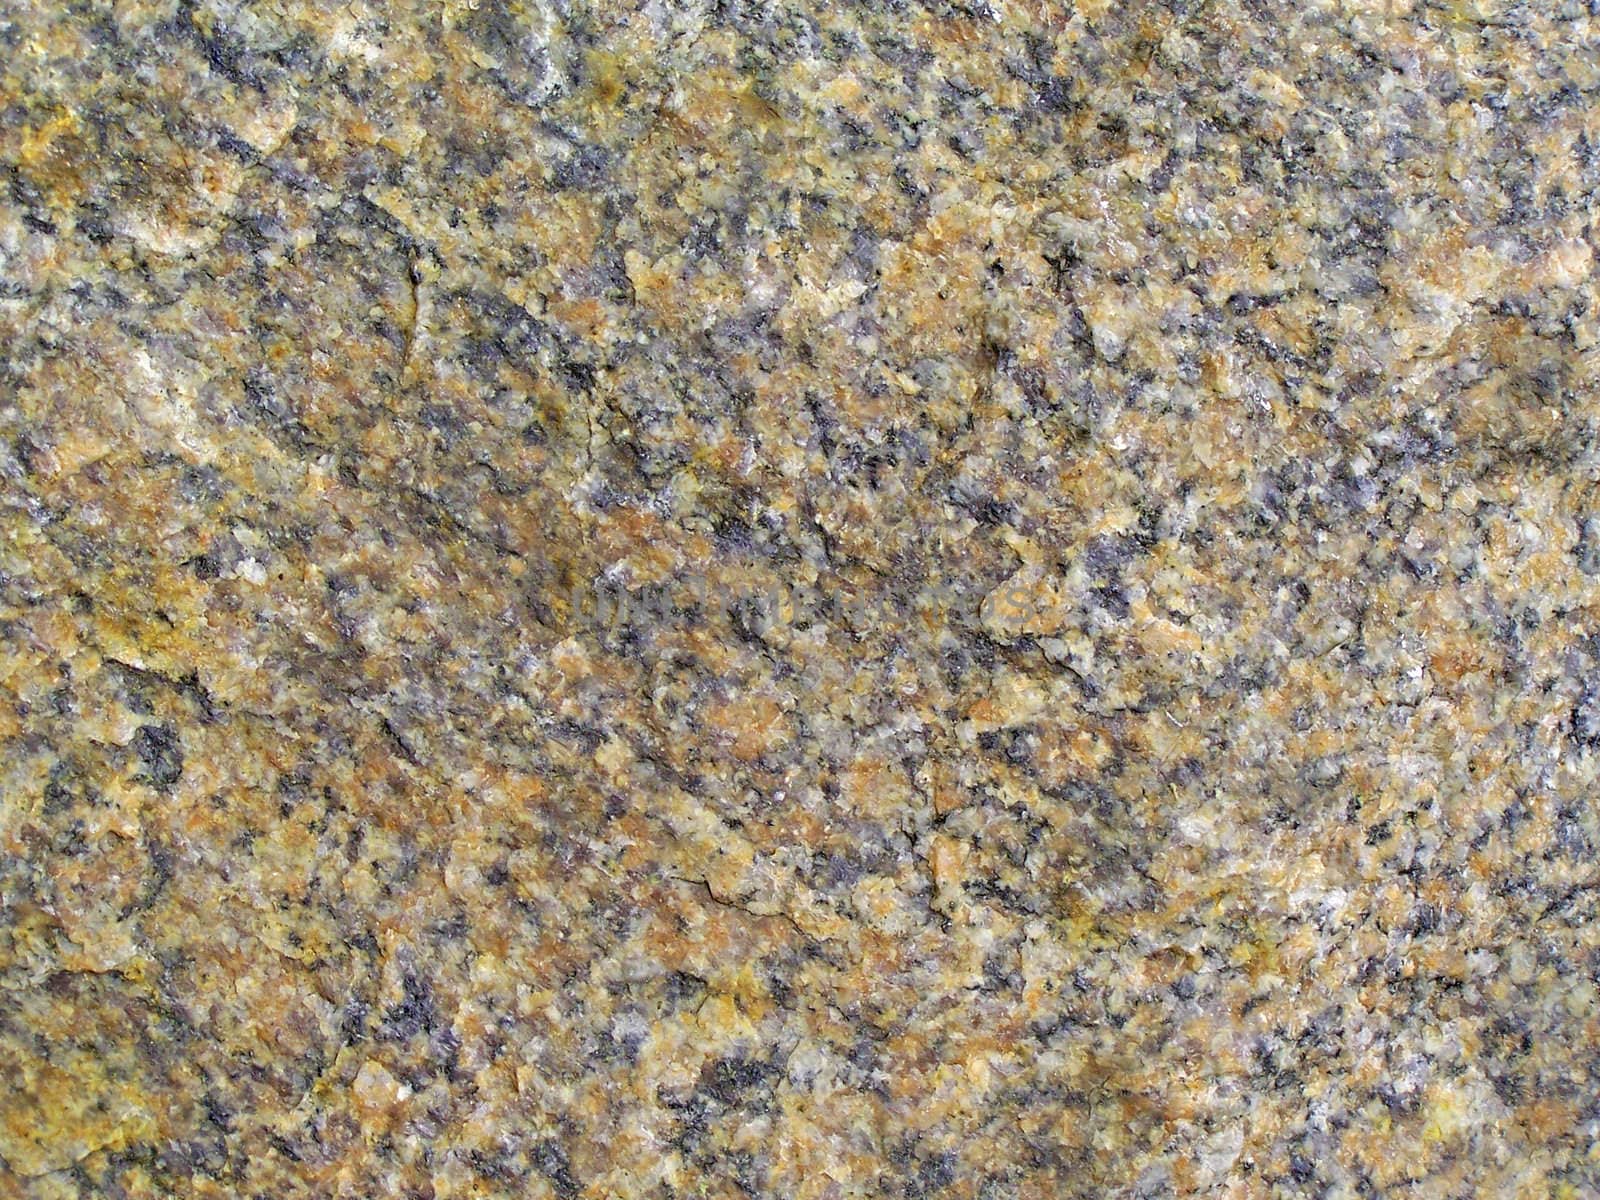 Close up of the stone texture.